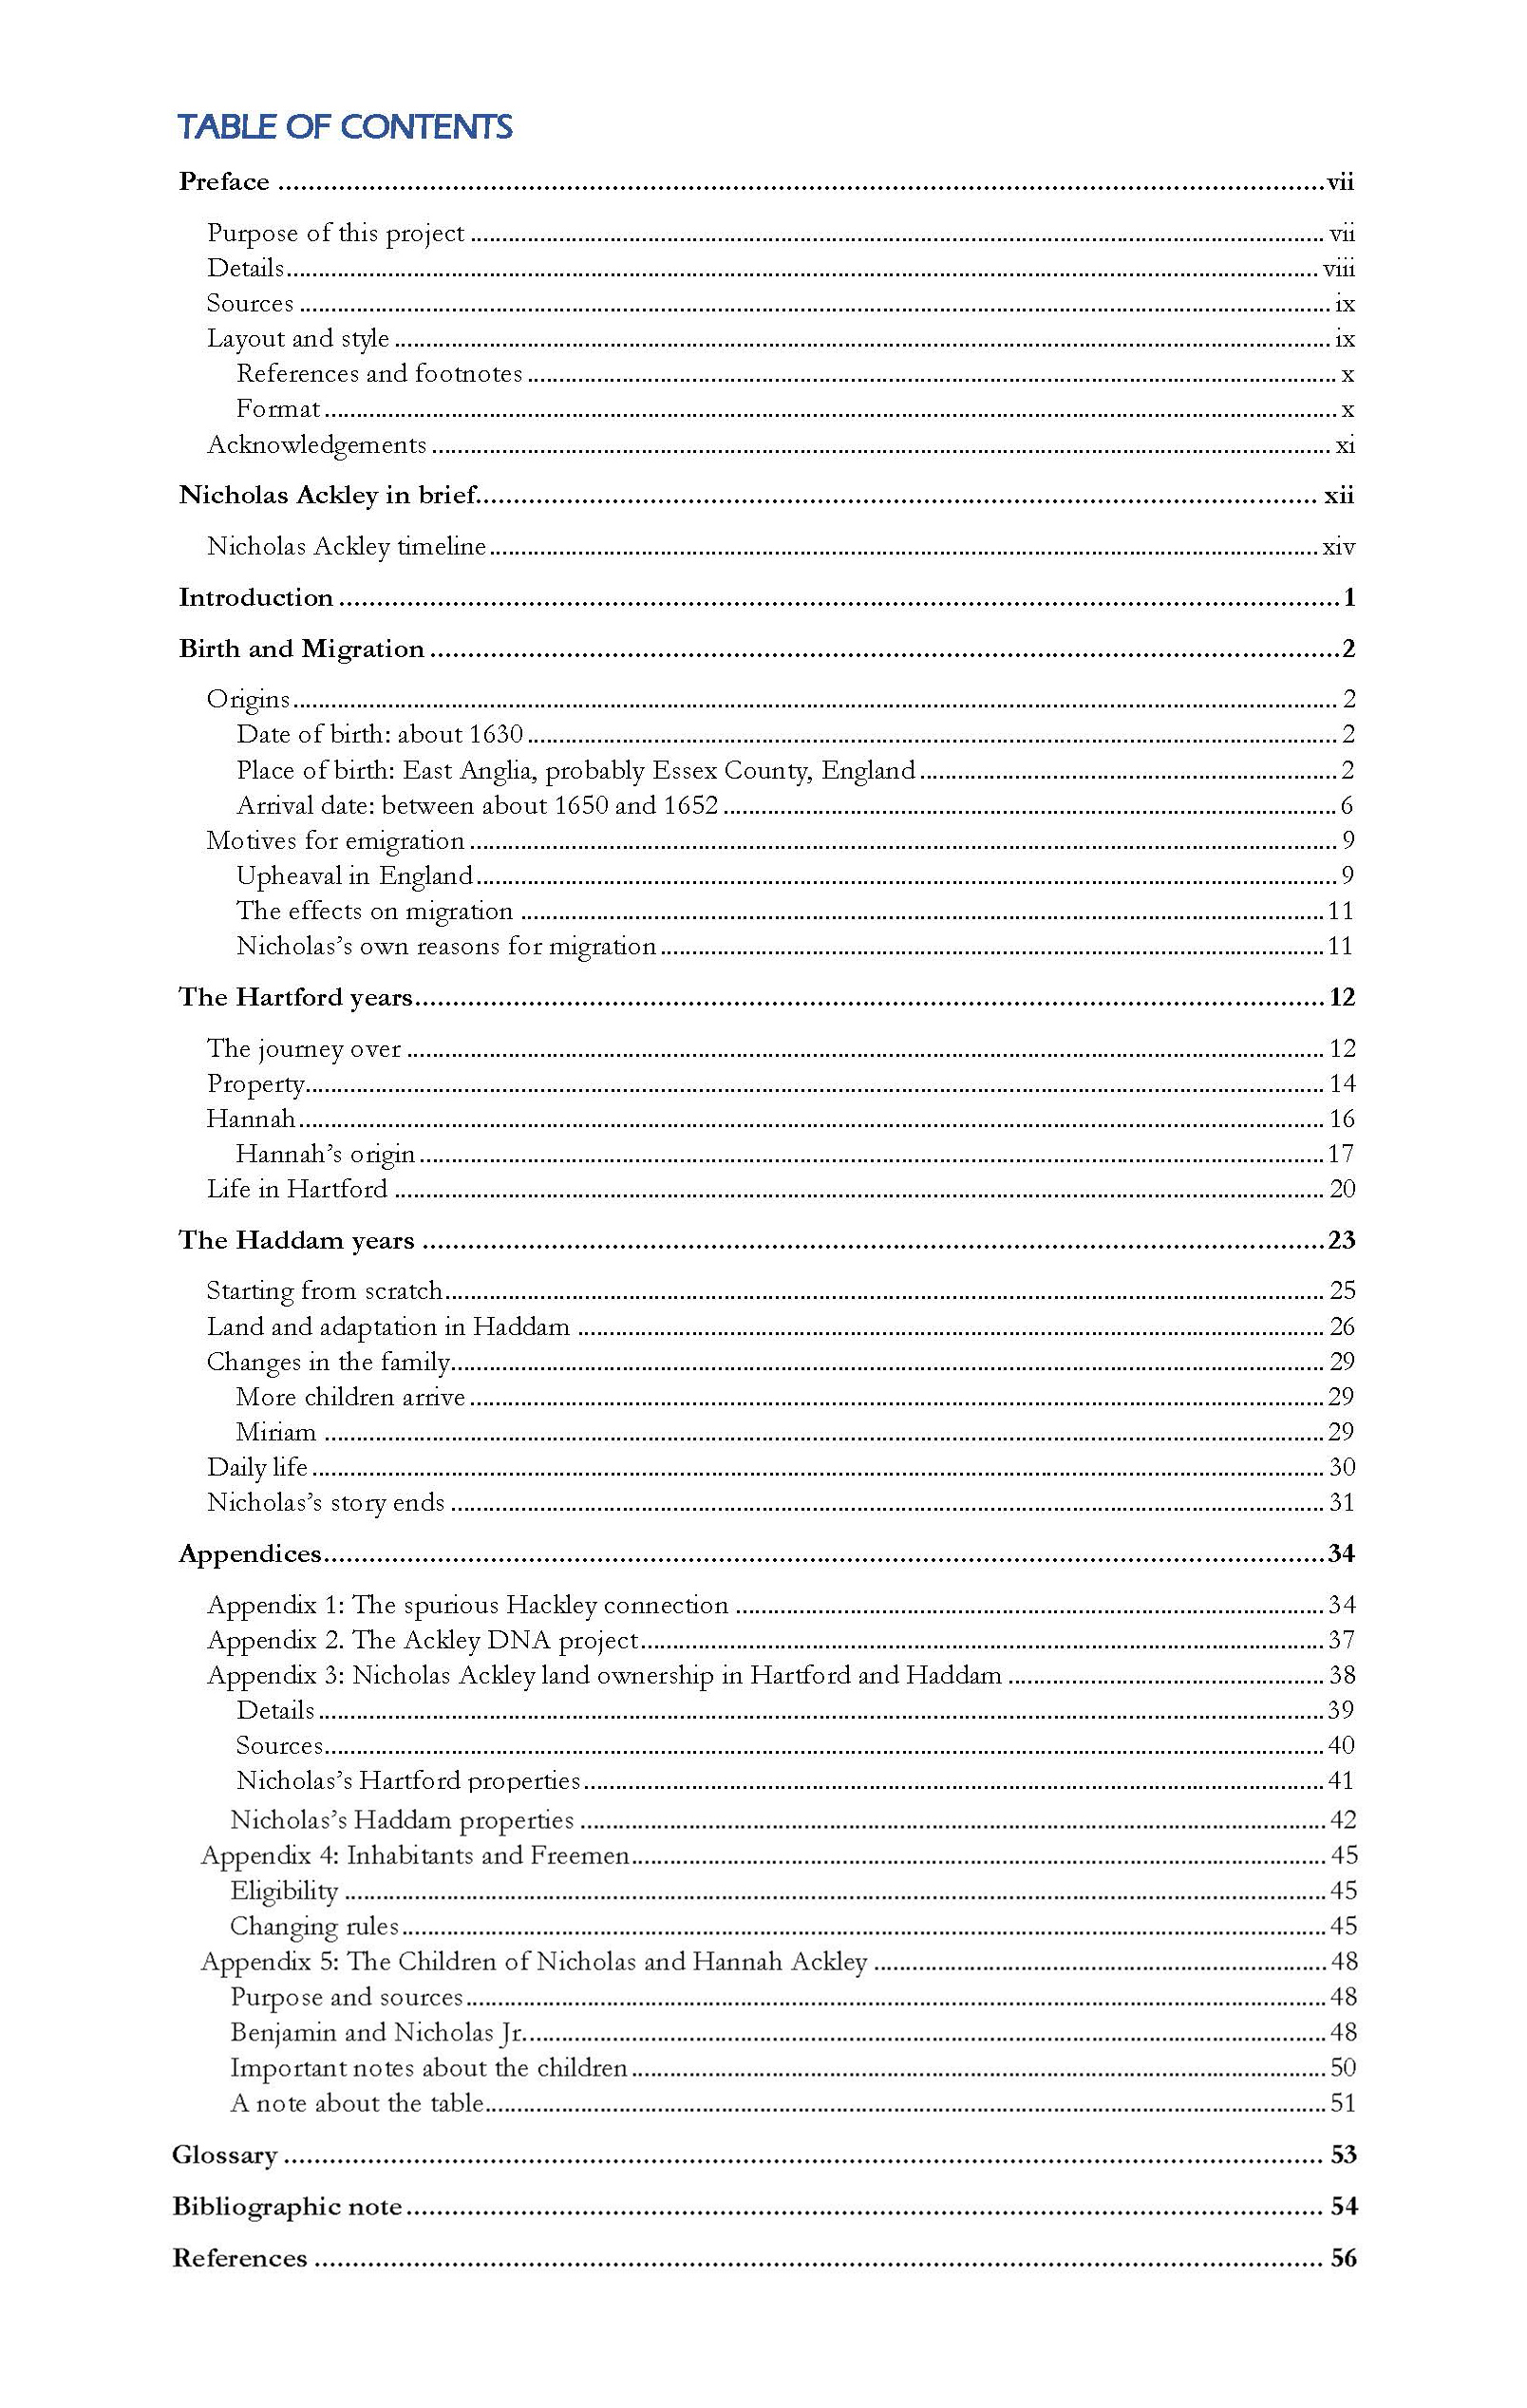 Nicholas Ackley family history: table of contents